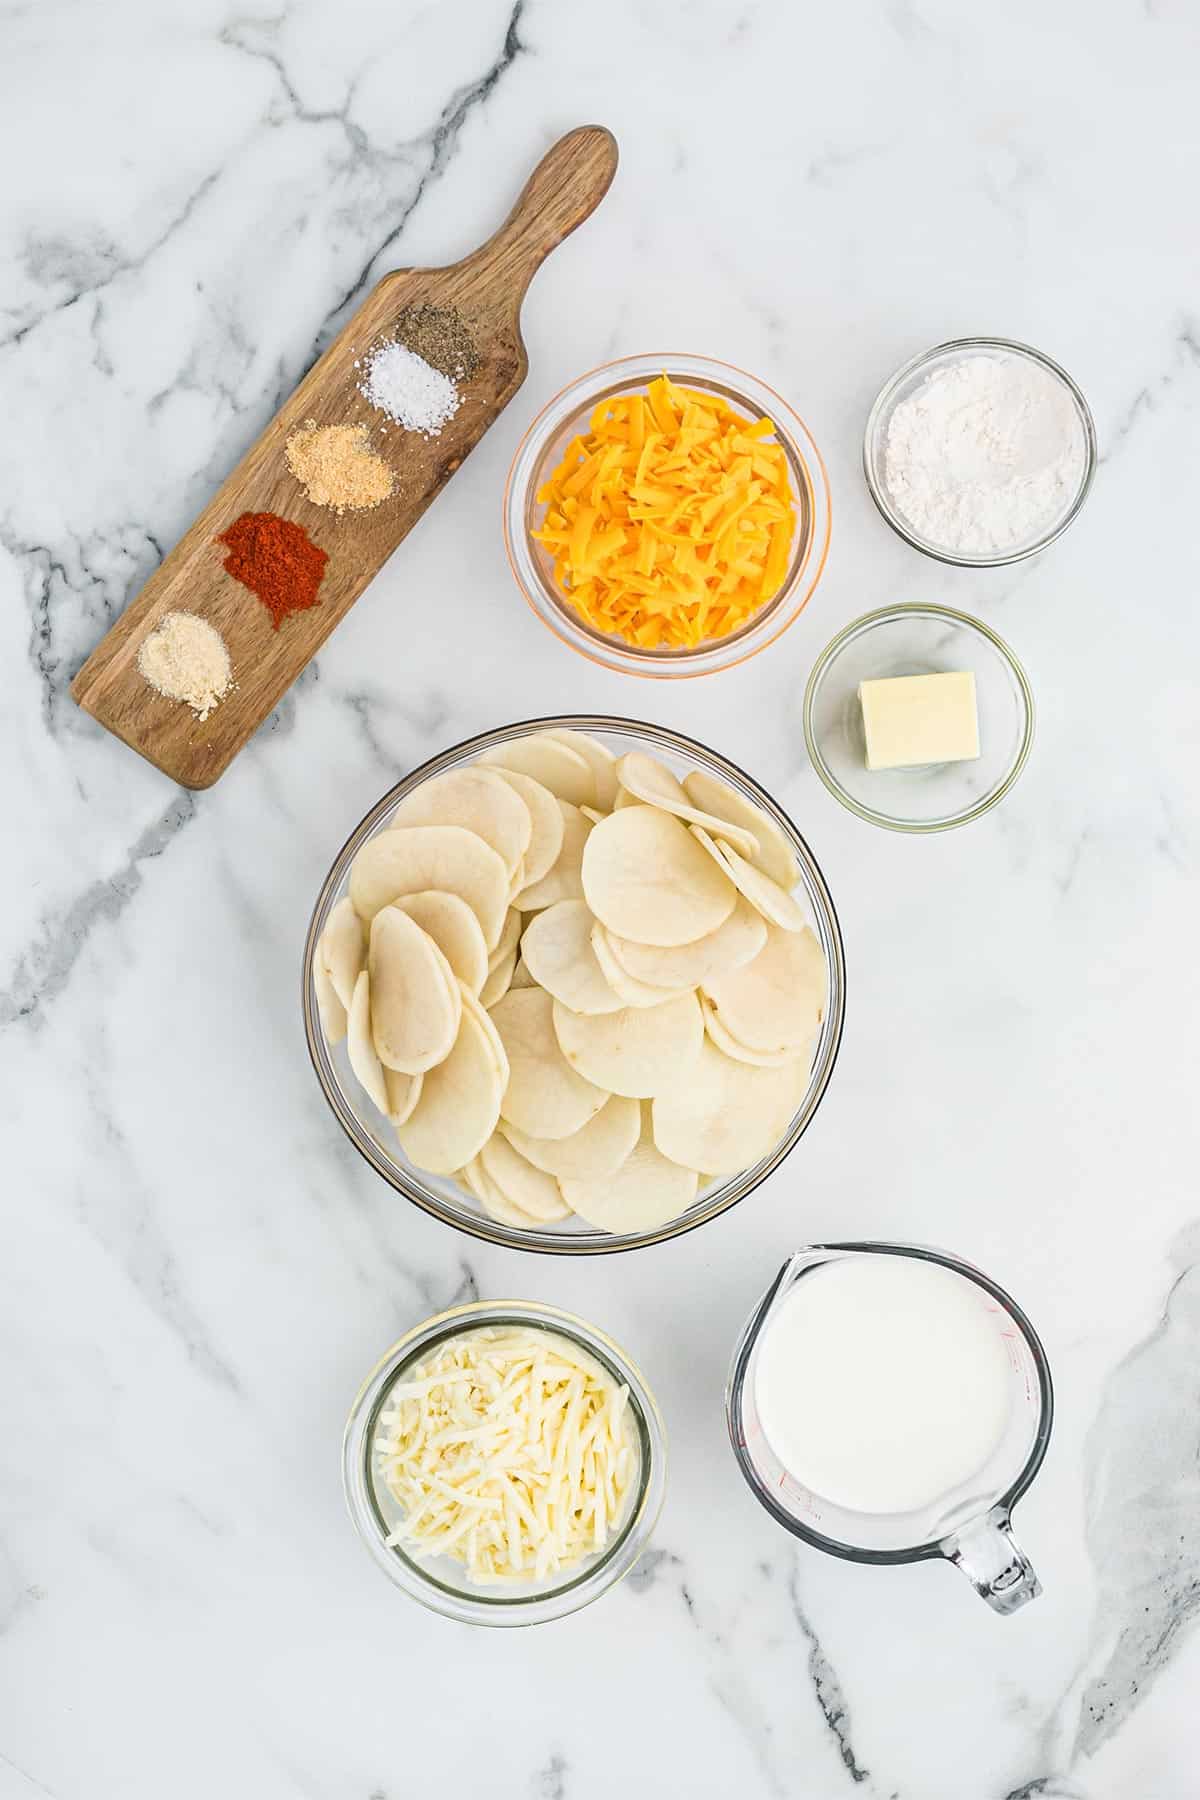 Ingredients to make cheesy scalloped potatoes on the table.